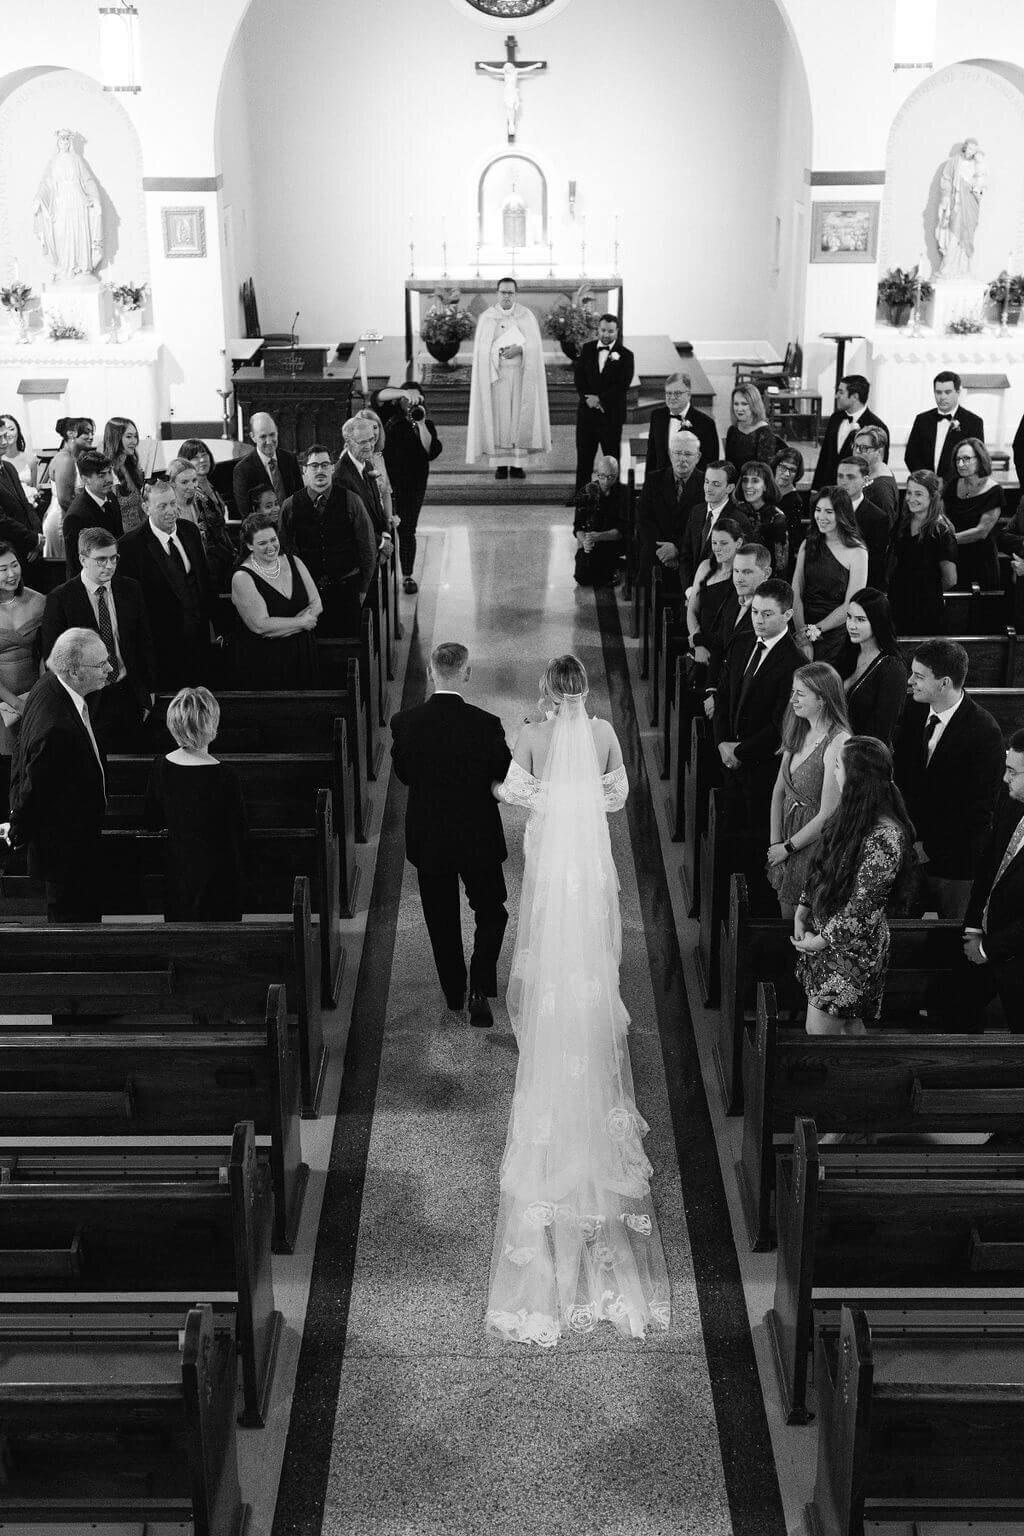 Dramatic black and white image of a bride being walked down her aisle by her father in a Georgetown Catholic Church.